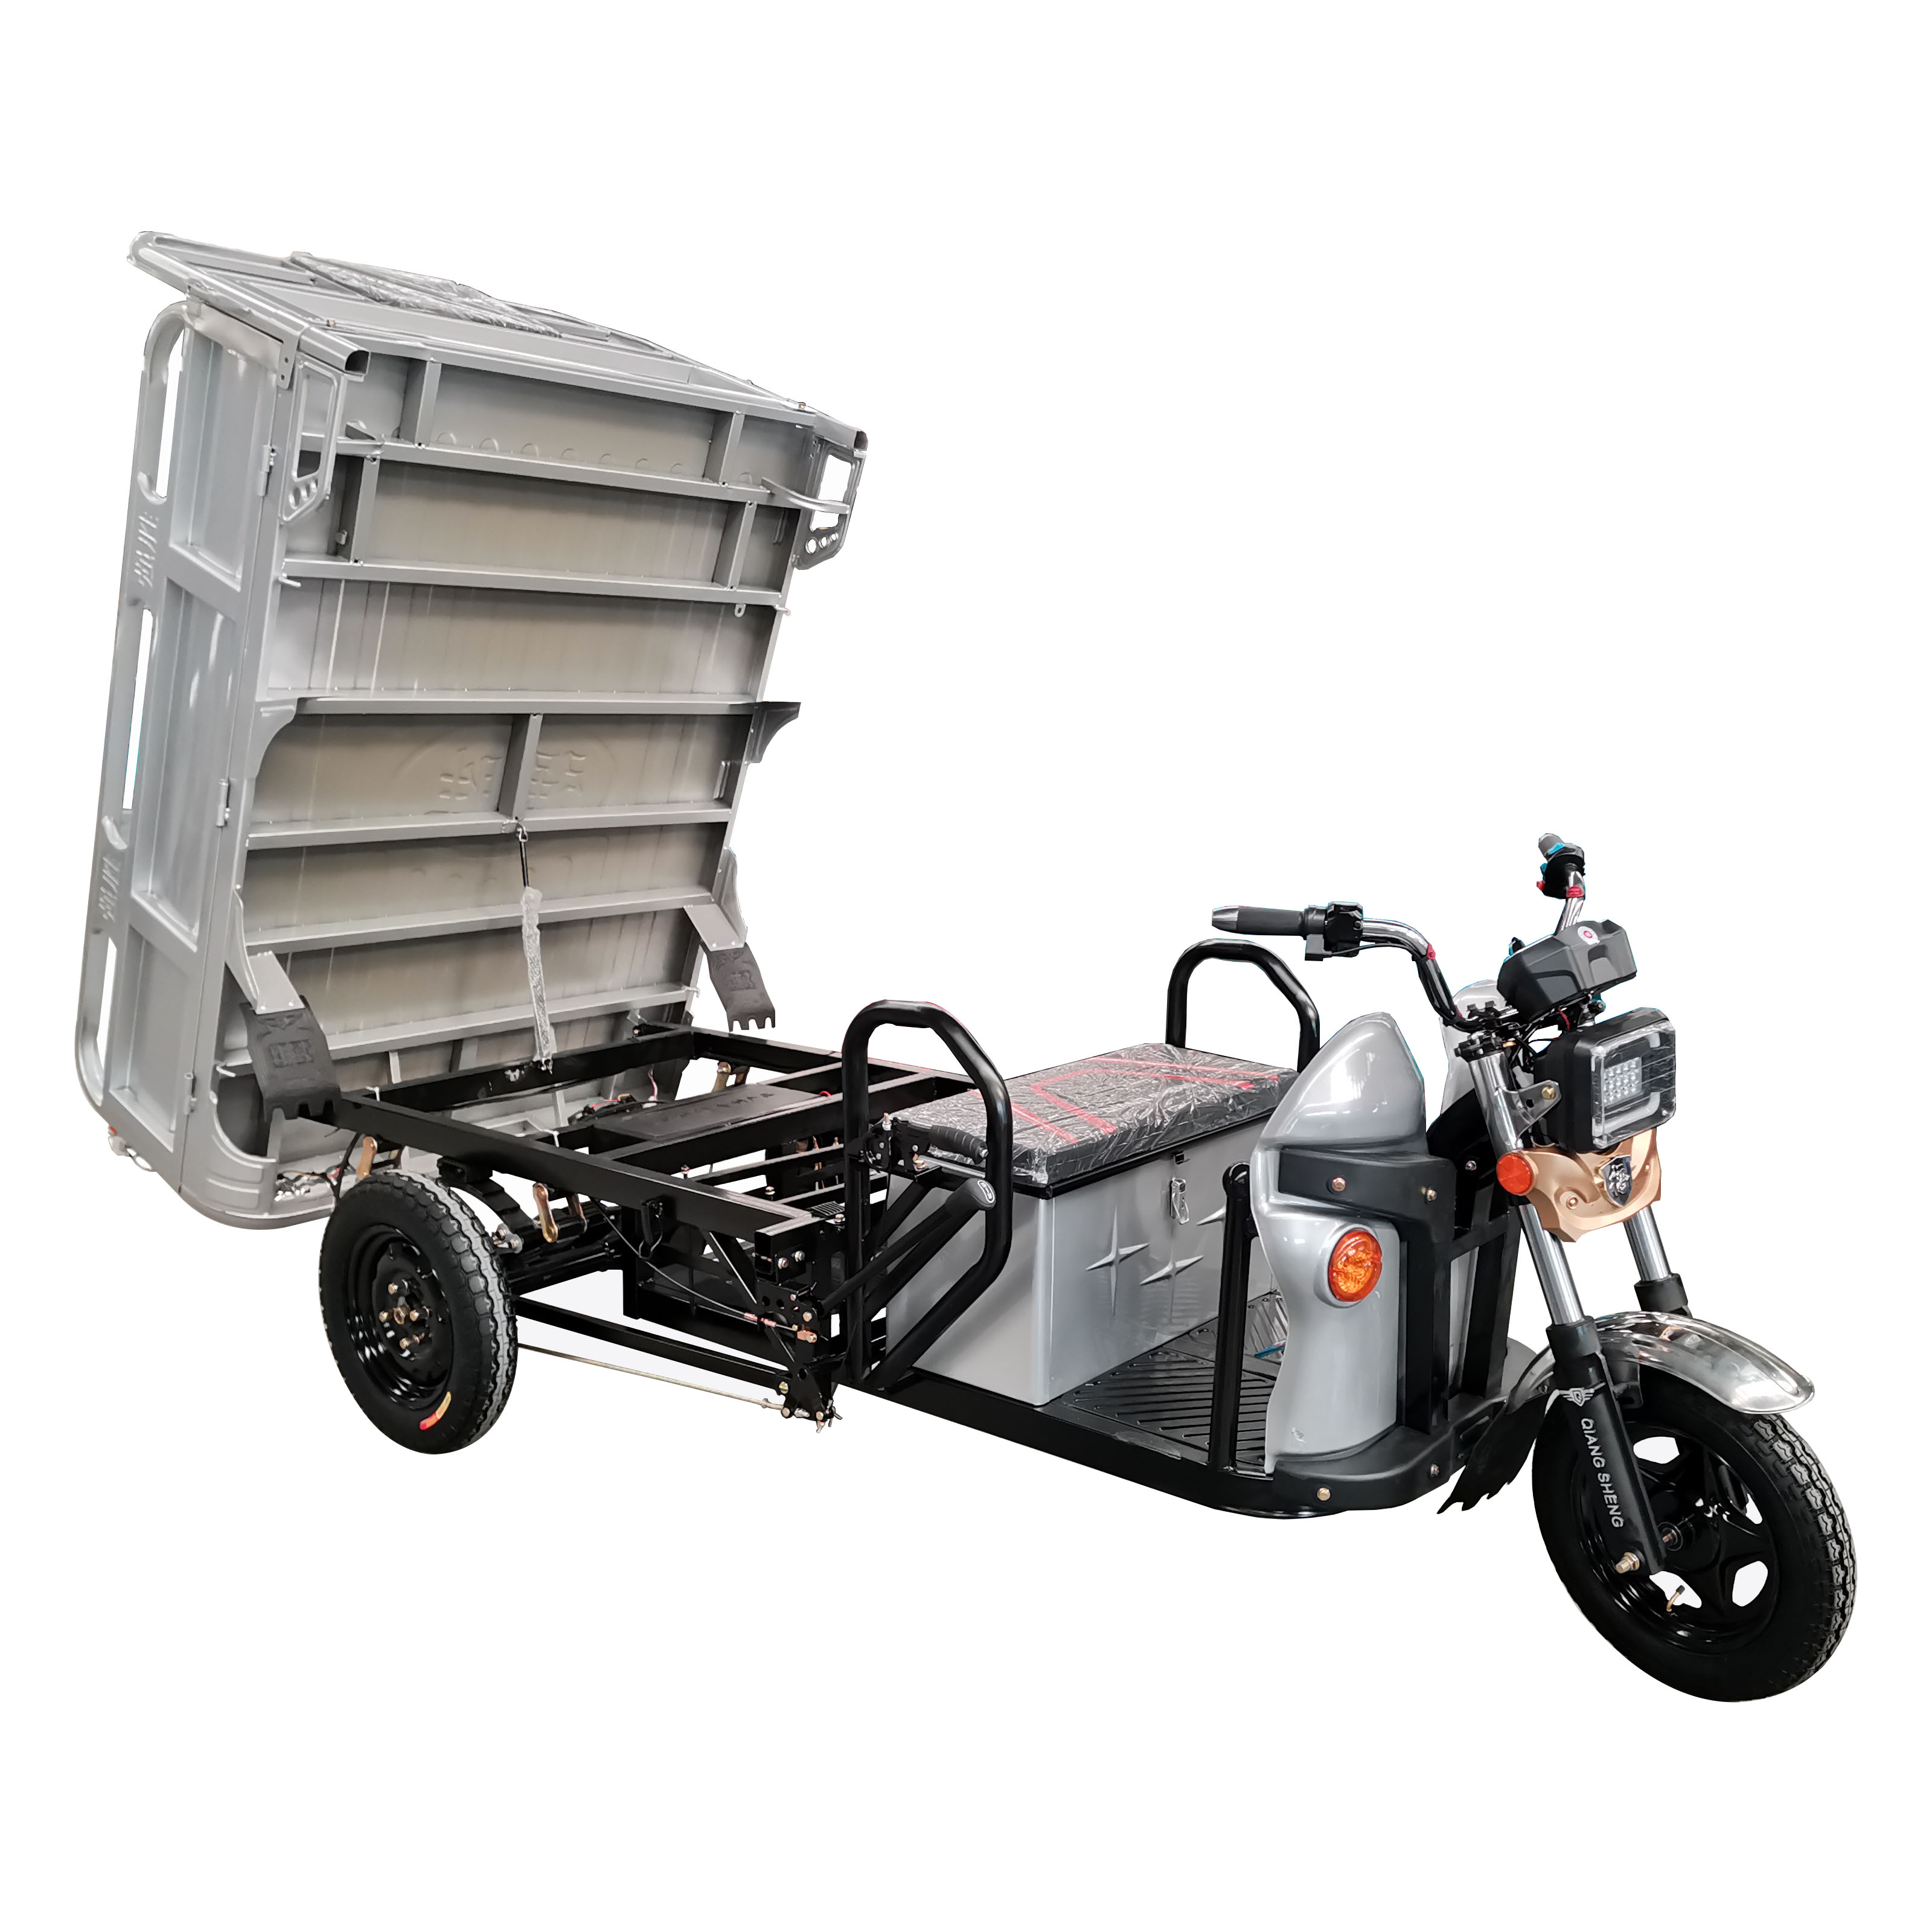 Electric Tricycle For 1Ton Cargo Transportation With Carriage Box Size of 1.7M*1.2M from China E Loader Factory